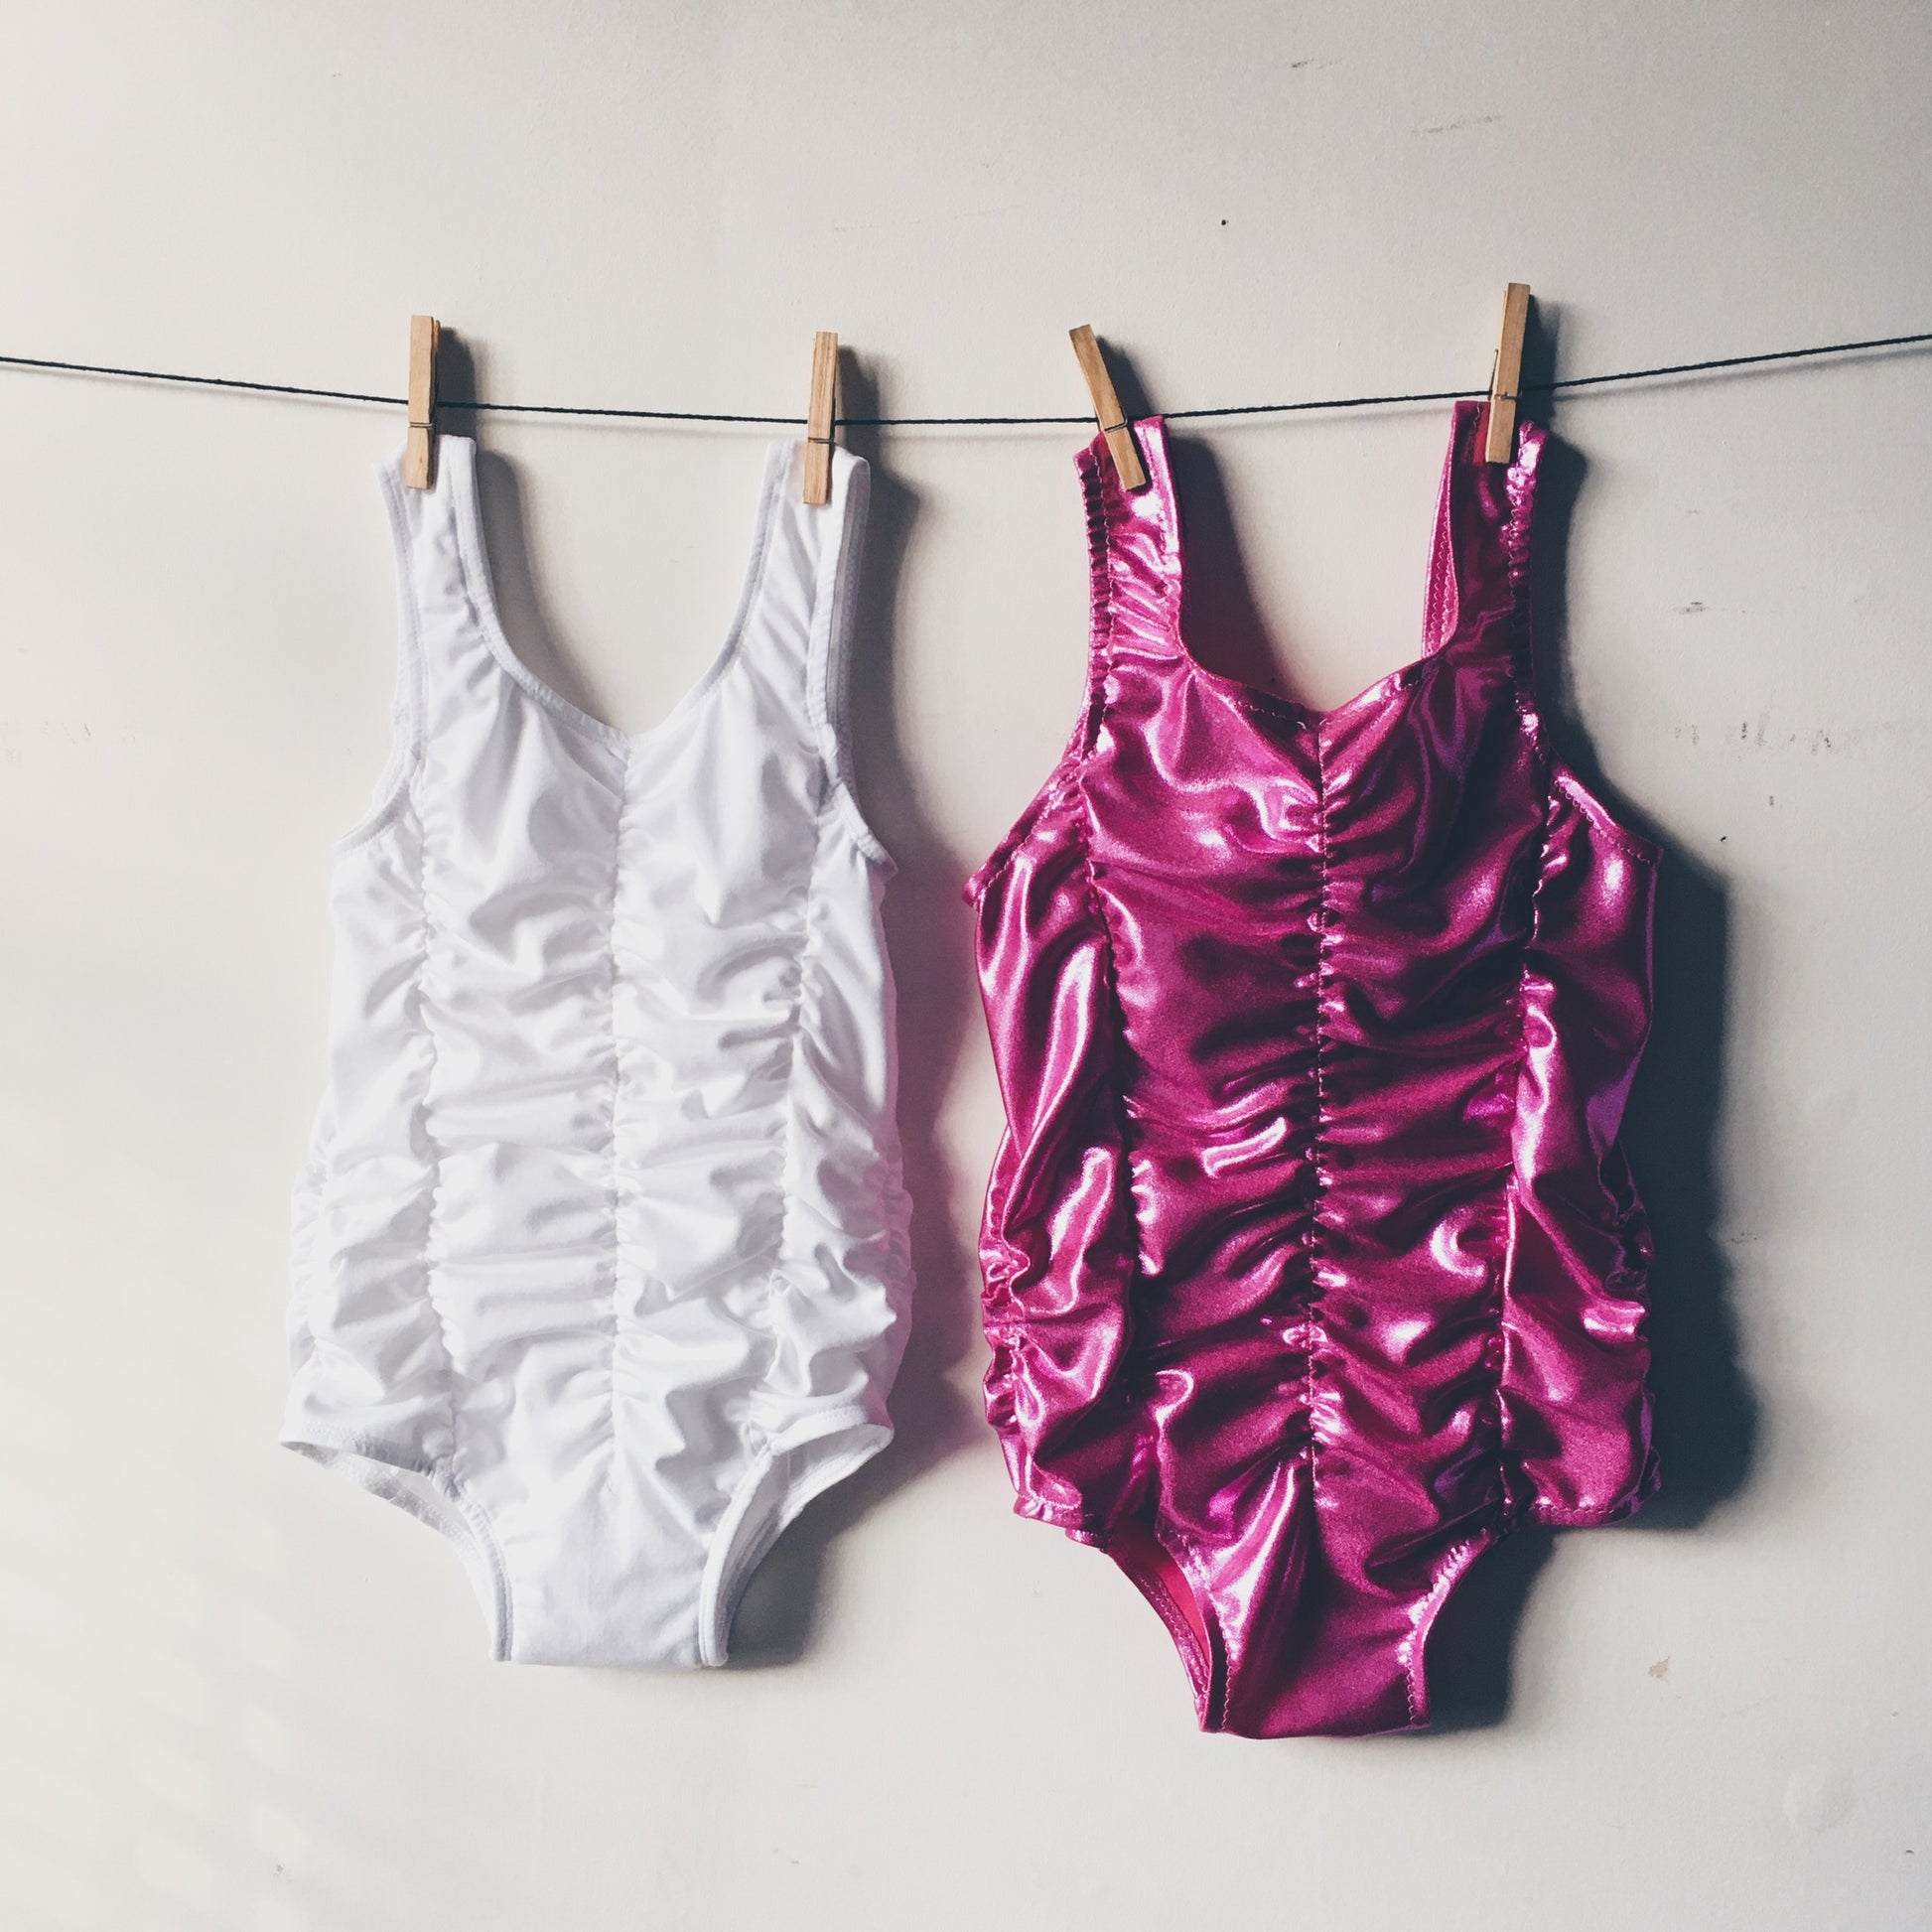 Two Tallulah Ruched Leotards pegged on line, White on the left and Pink on the right